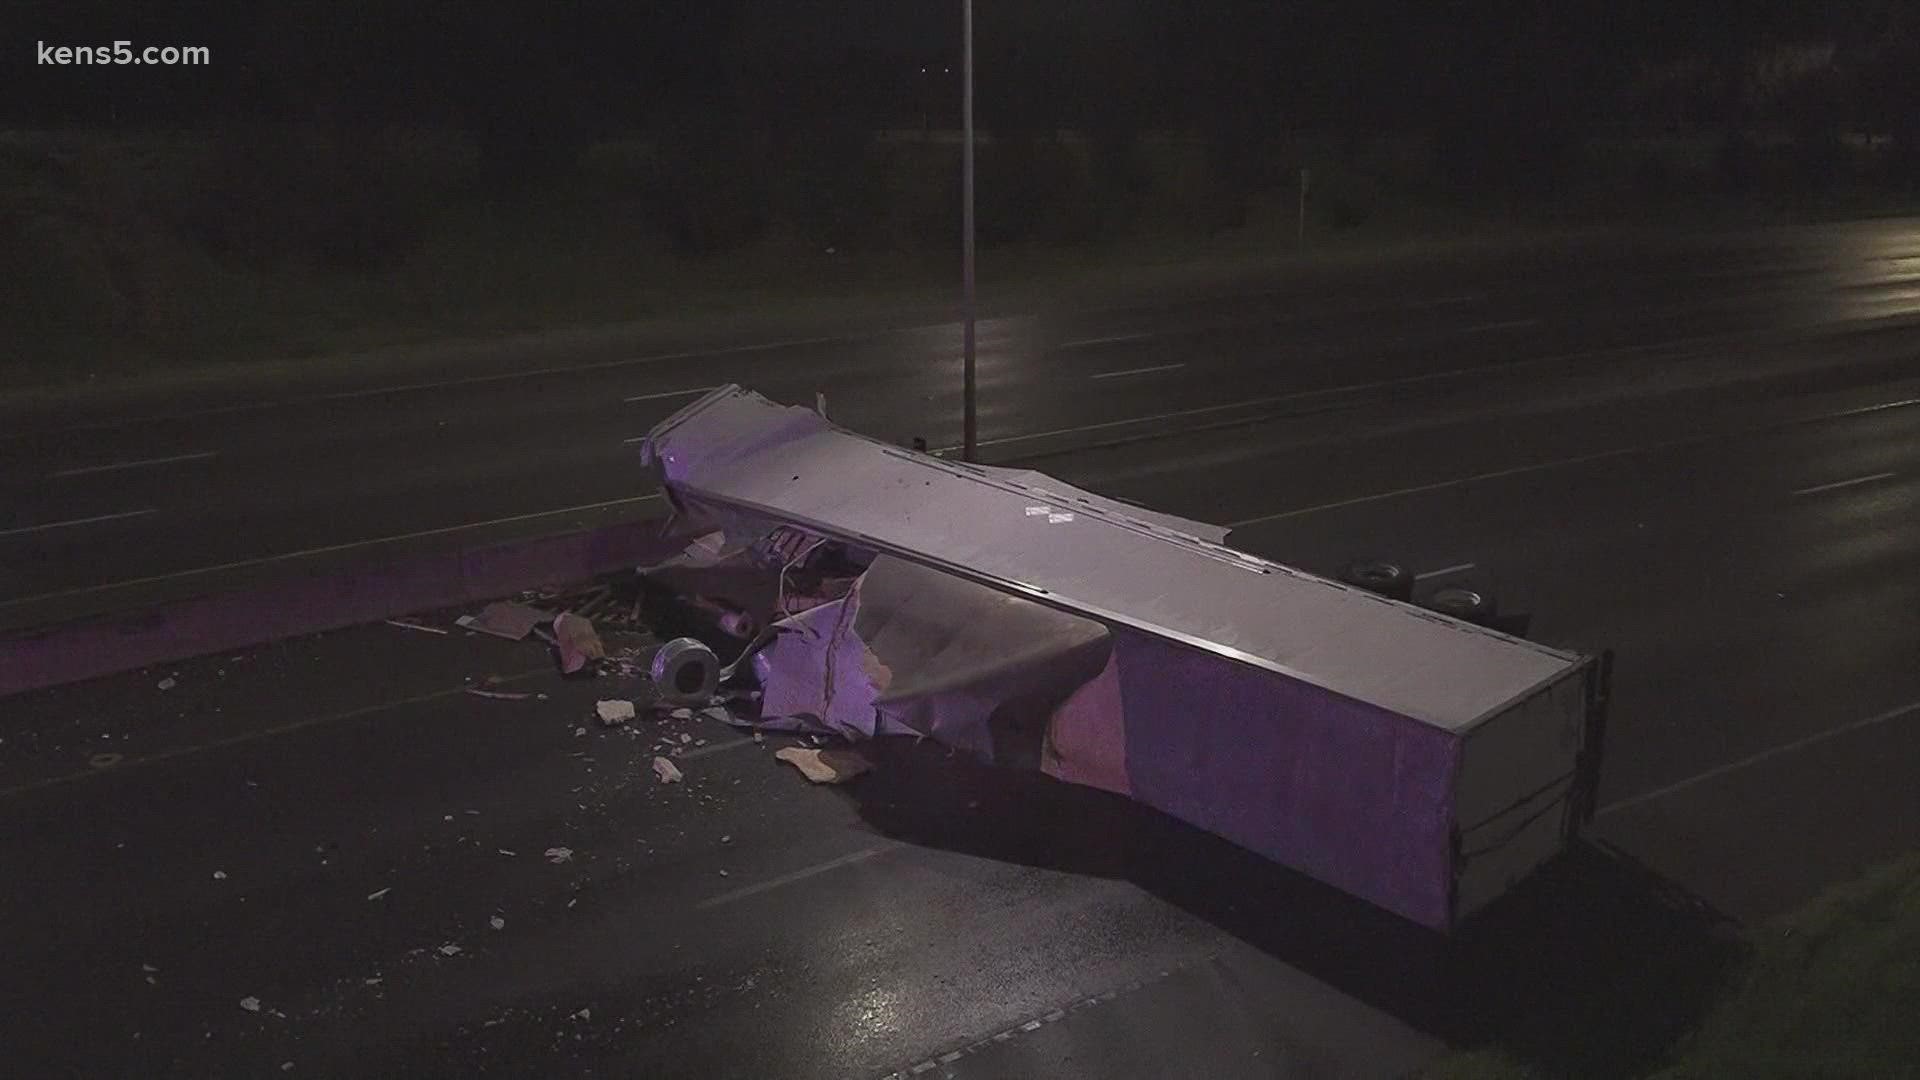 The truck's trailer wound up sideways across all lanes of 281.